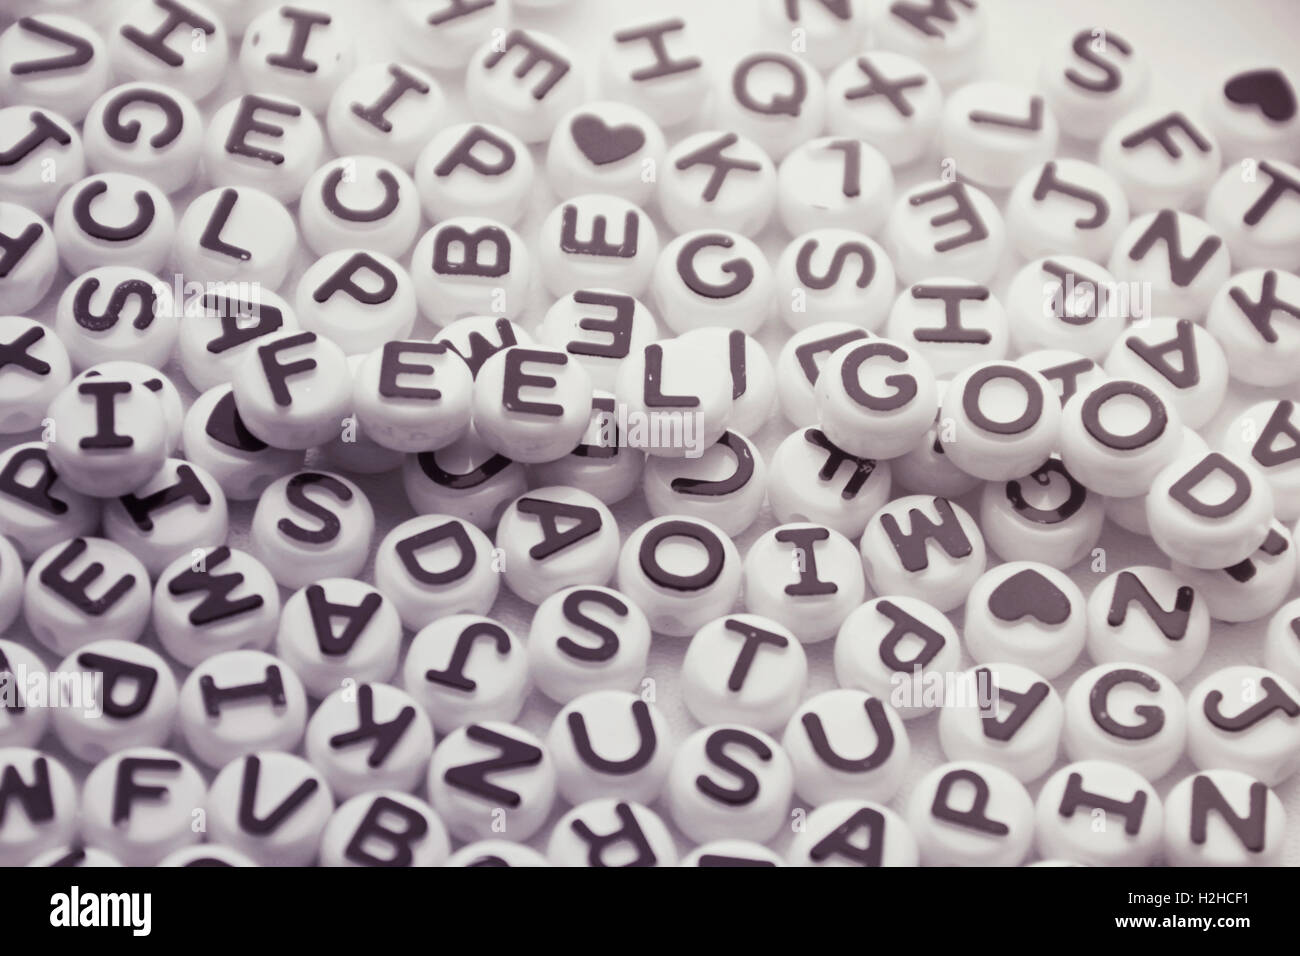 I feel good text made of alphabet letters Stock Photo